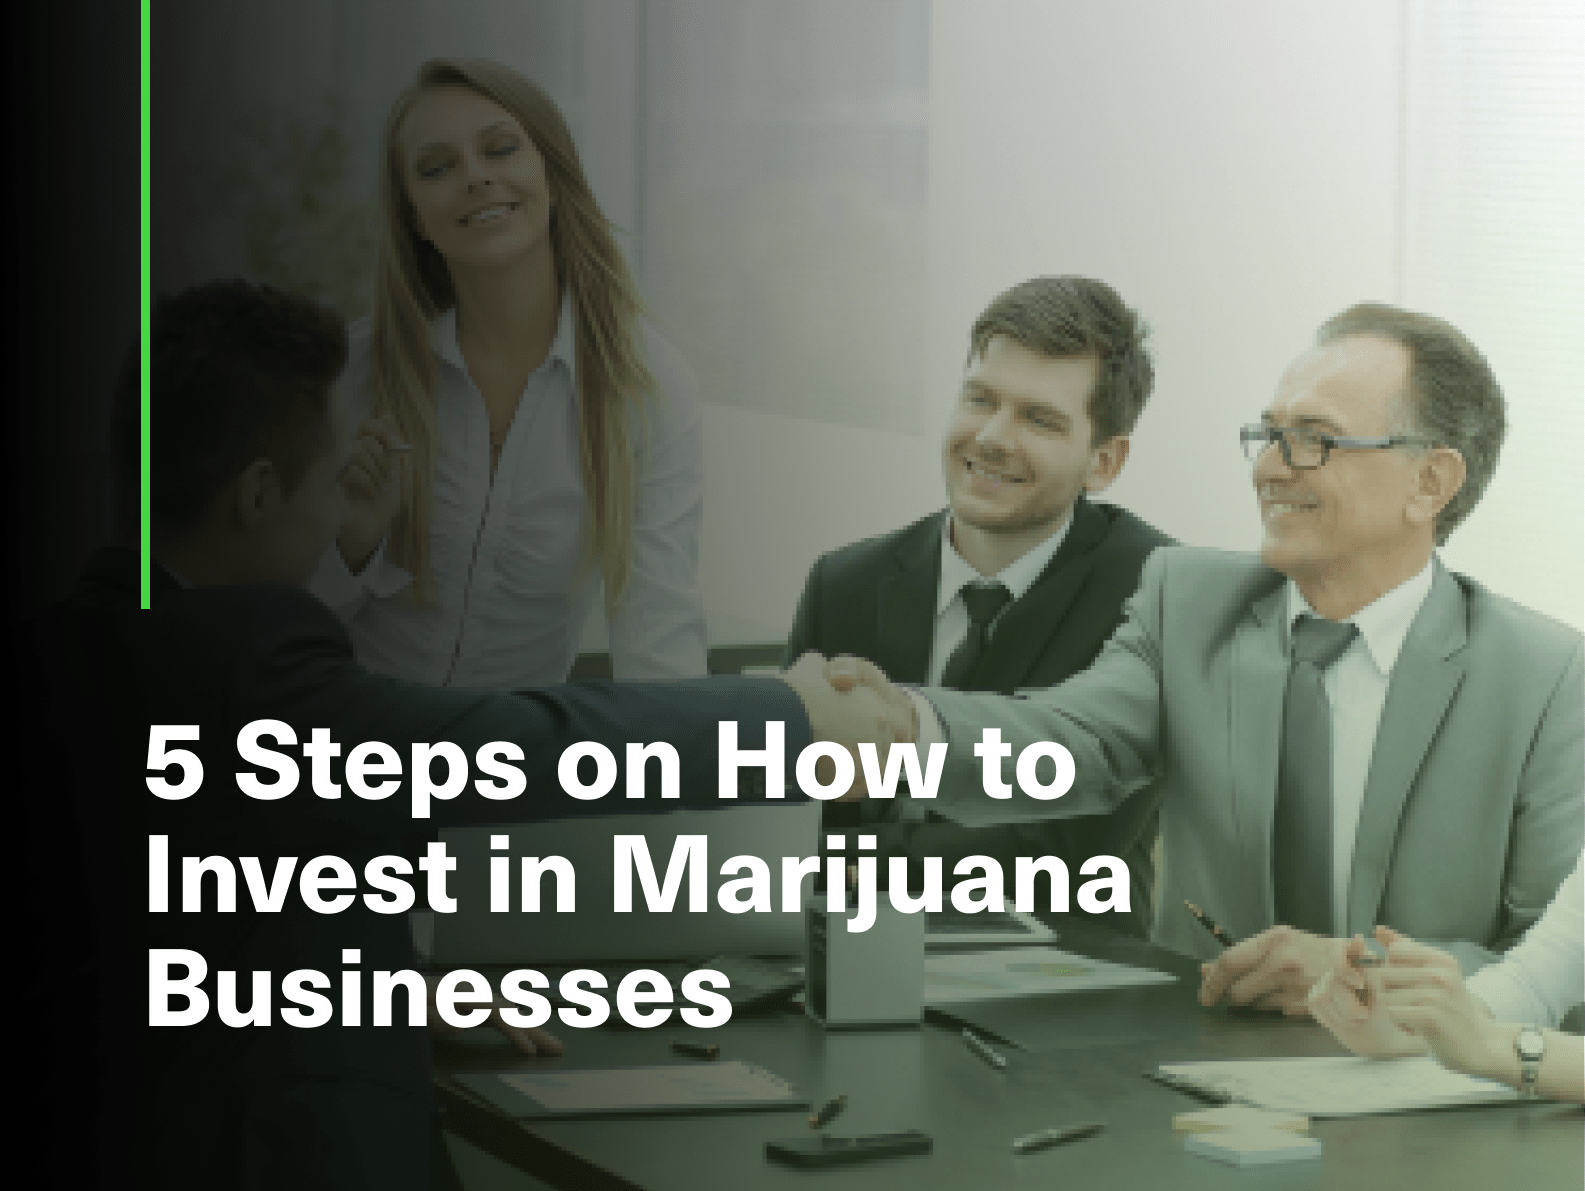 5 STEPS ON HOW TO INVEST IN MARIJUANA BUSINESSES